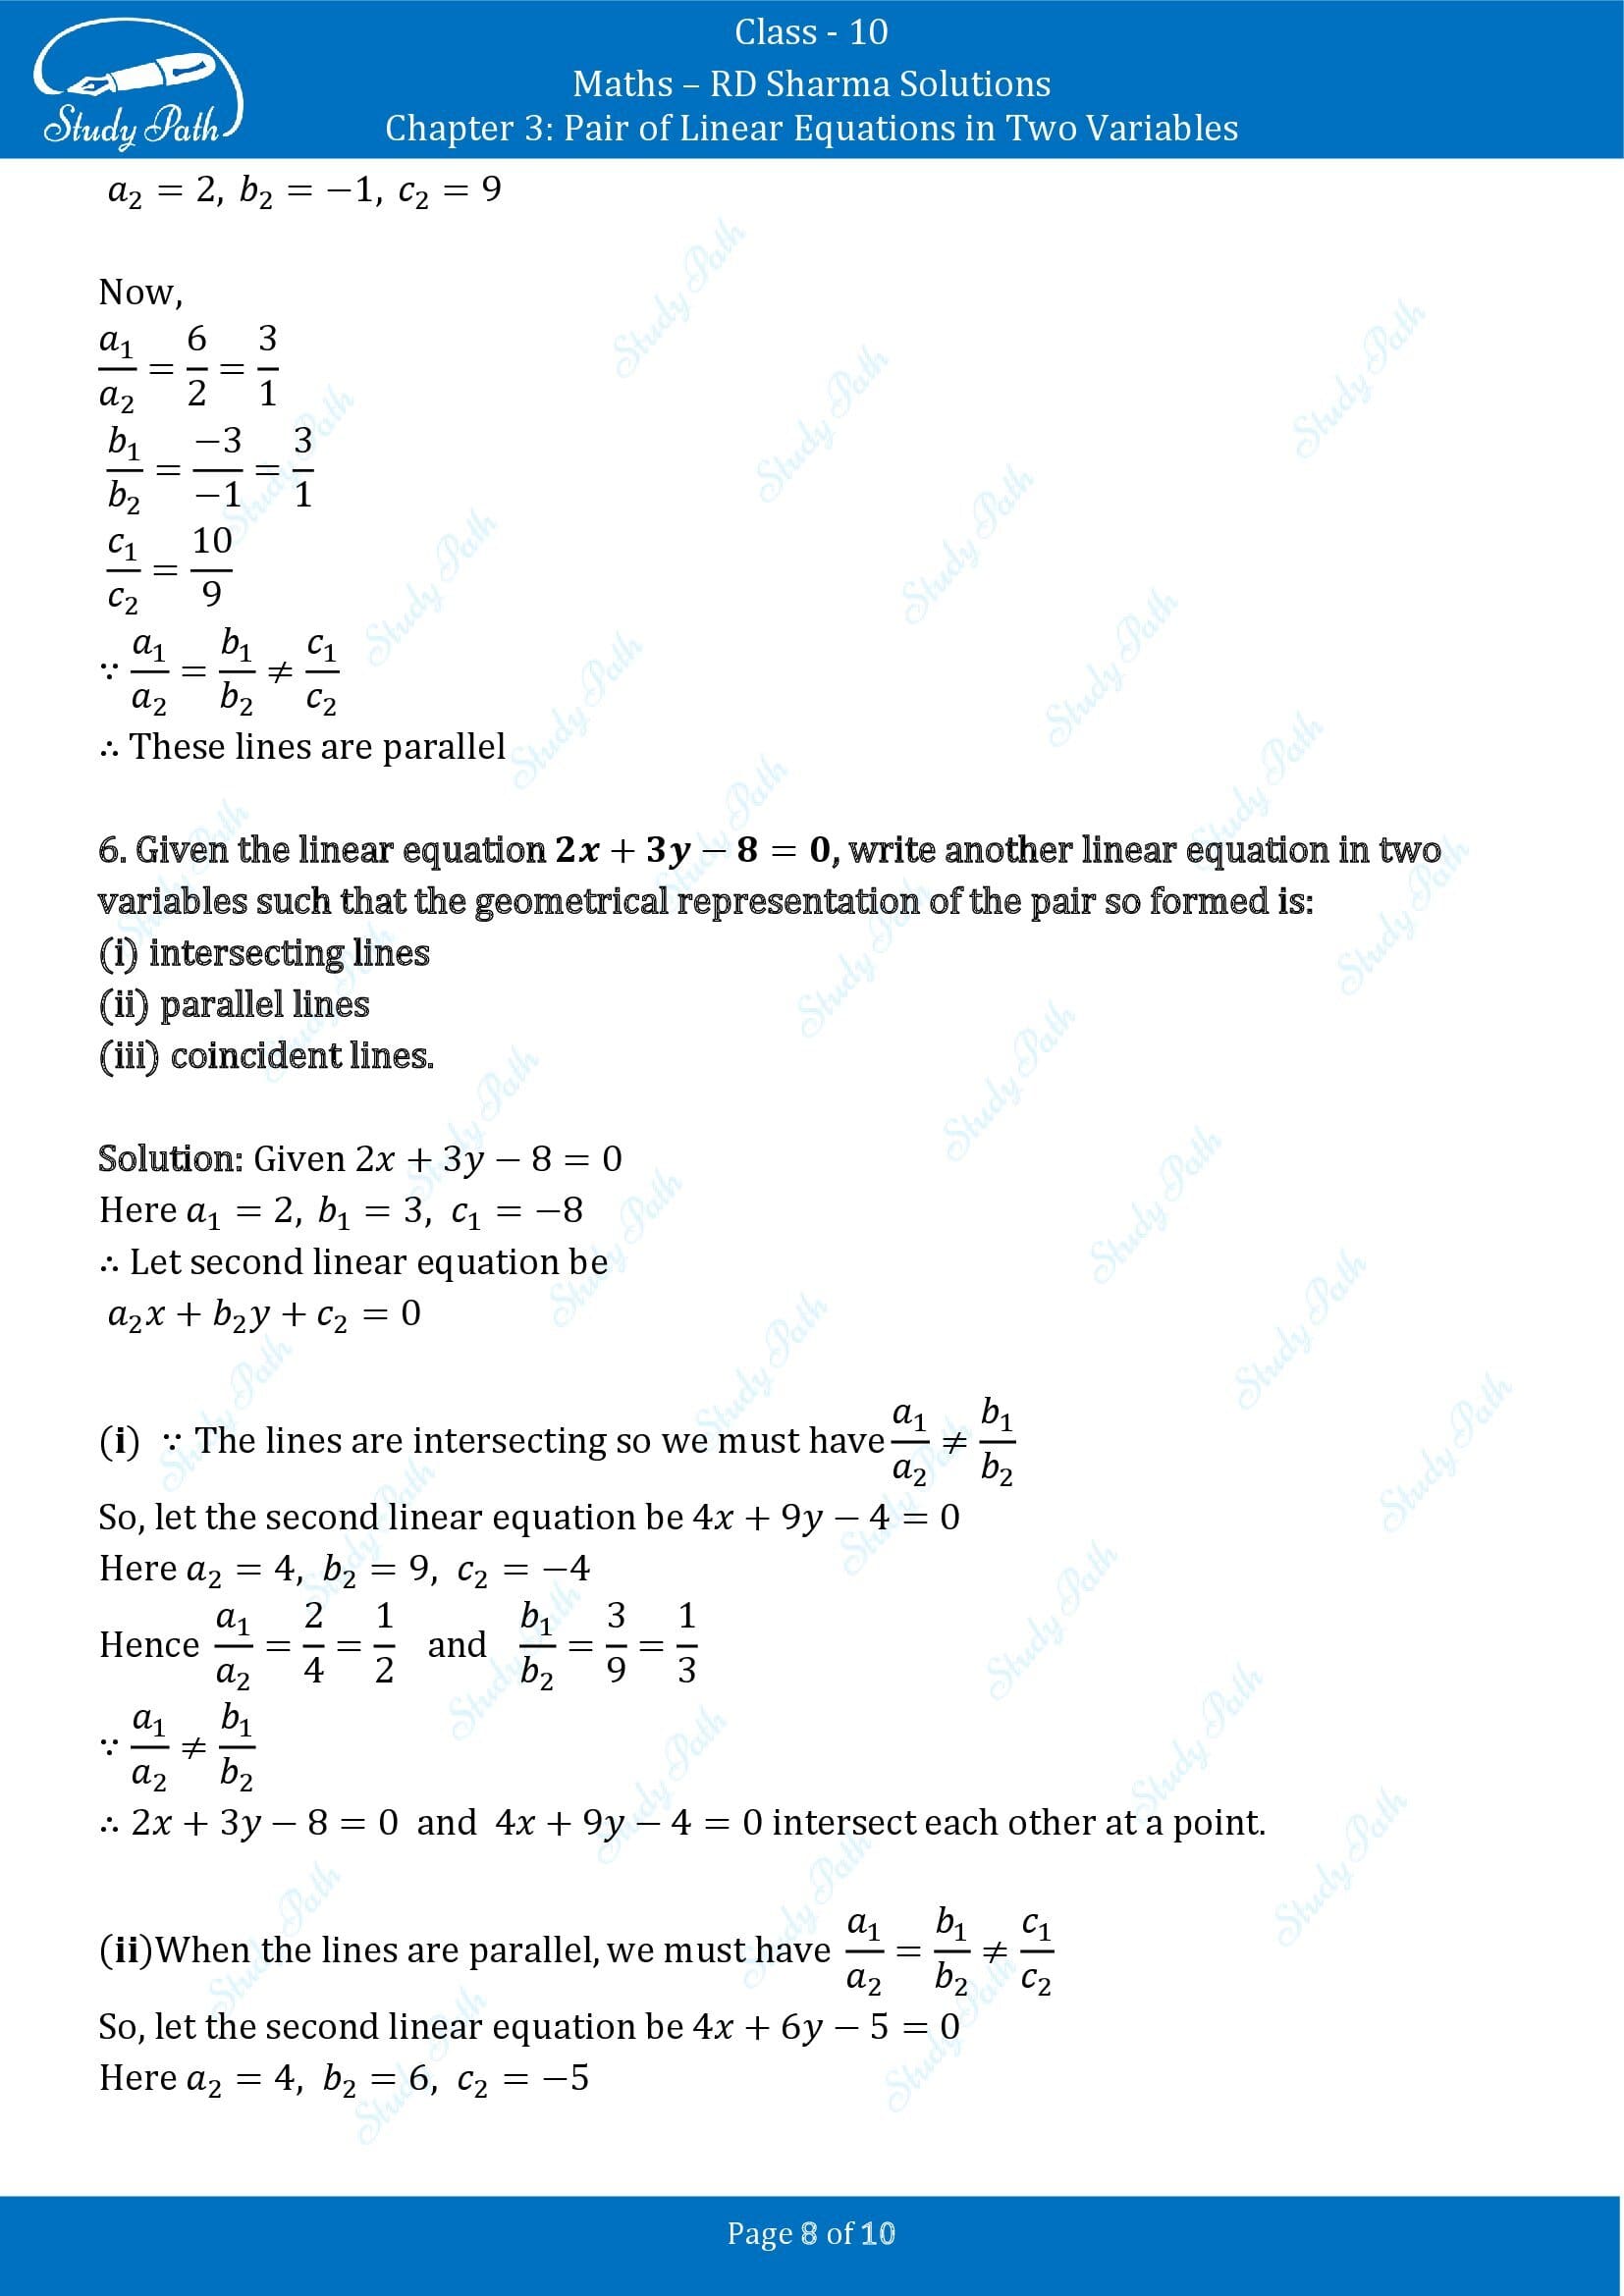 RD Sharma Solutions Class 10 Chapter 3 Pair of Linear Equations in Two Variables Exercise 3.1 00008